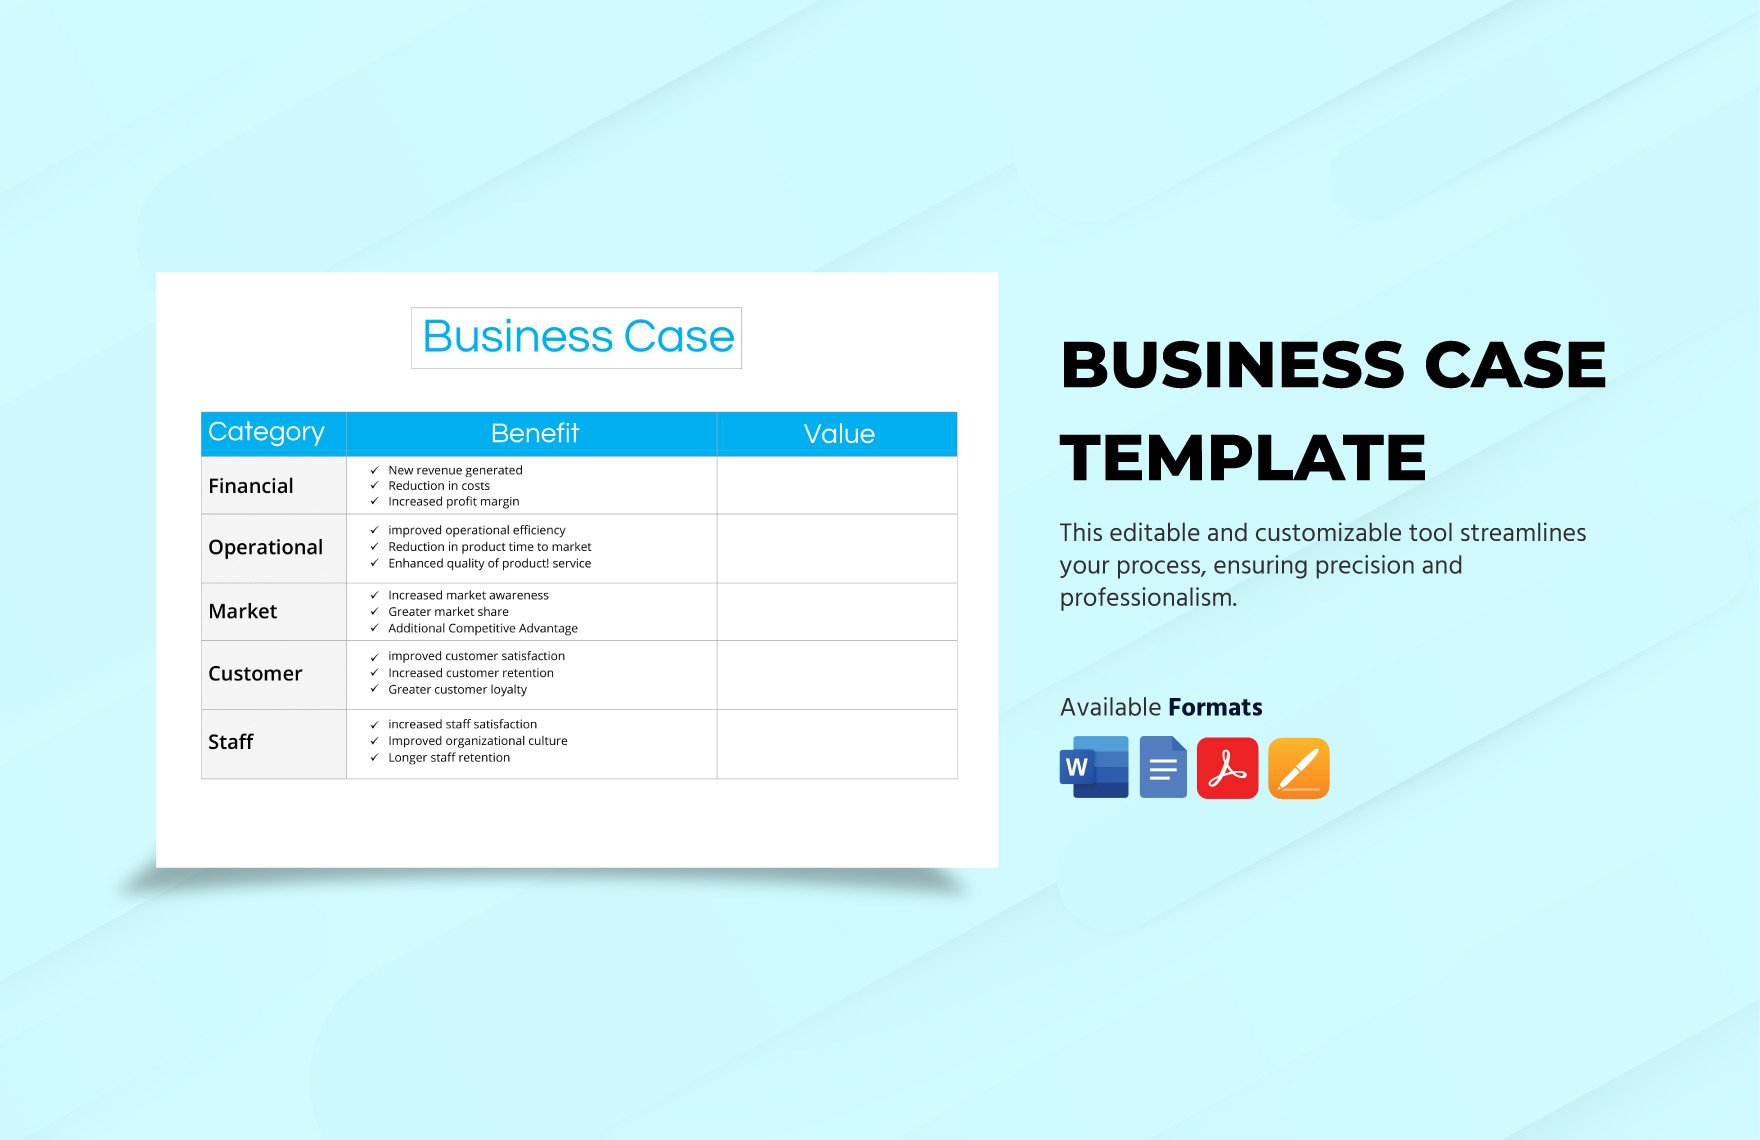 Business Case template